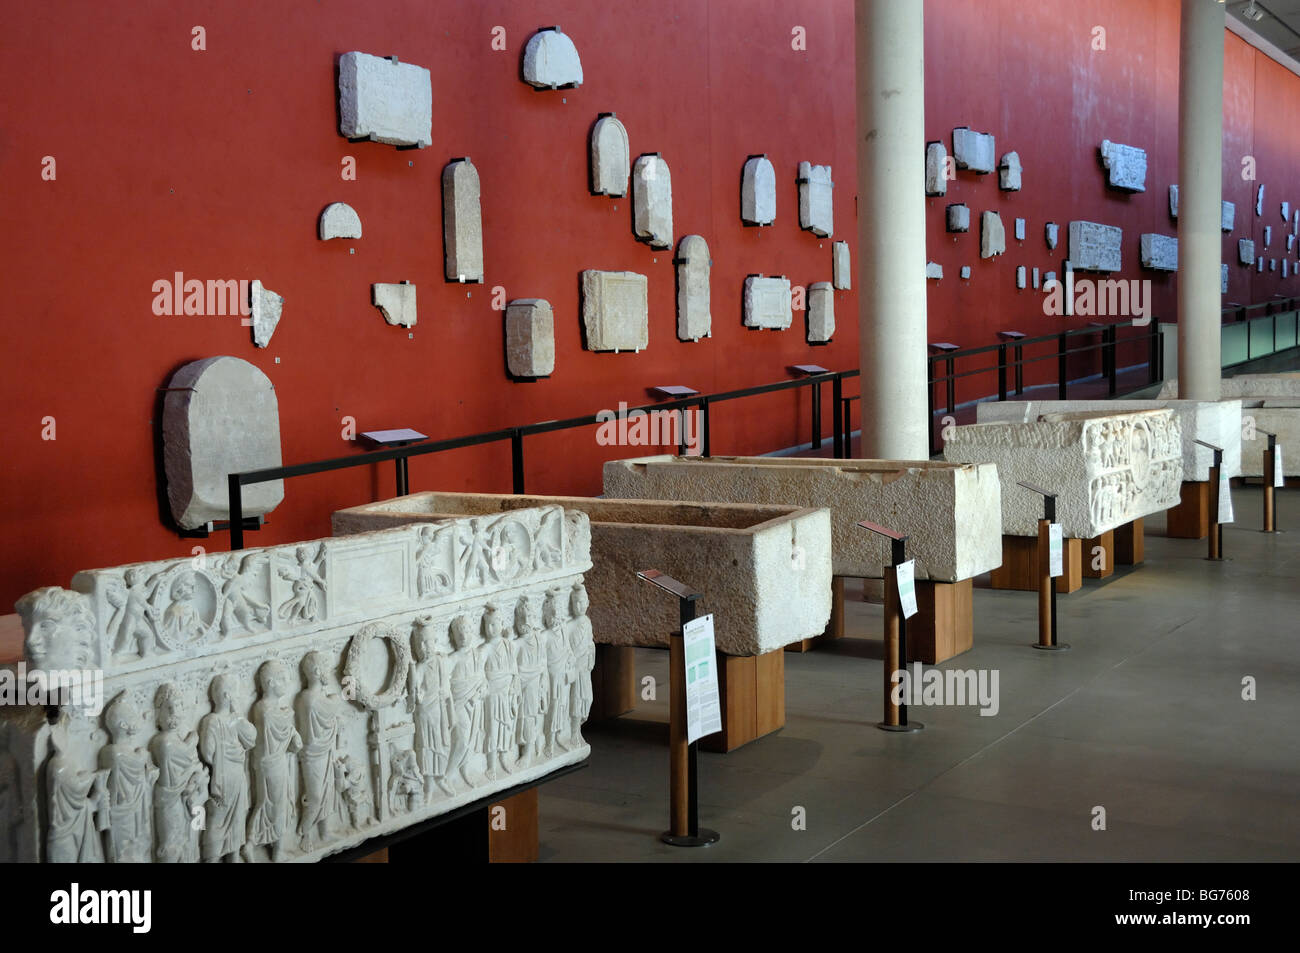 Interior of the Musée de l'Arles Antique, or Arles Antiquity Museum, with  Roman Sacrophagii & Antiquities, Arles,Provence,France Stock Photo - Alamy